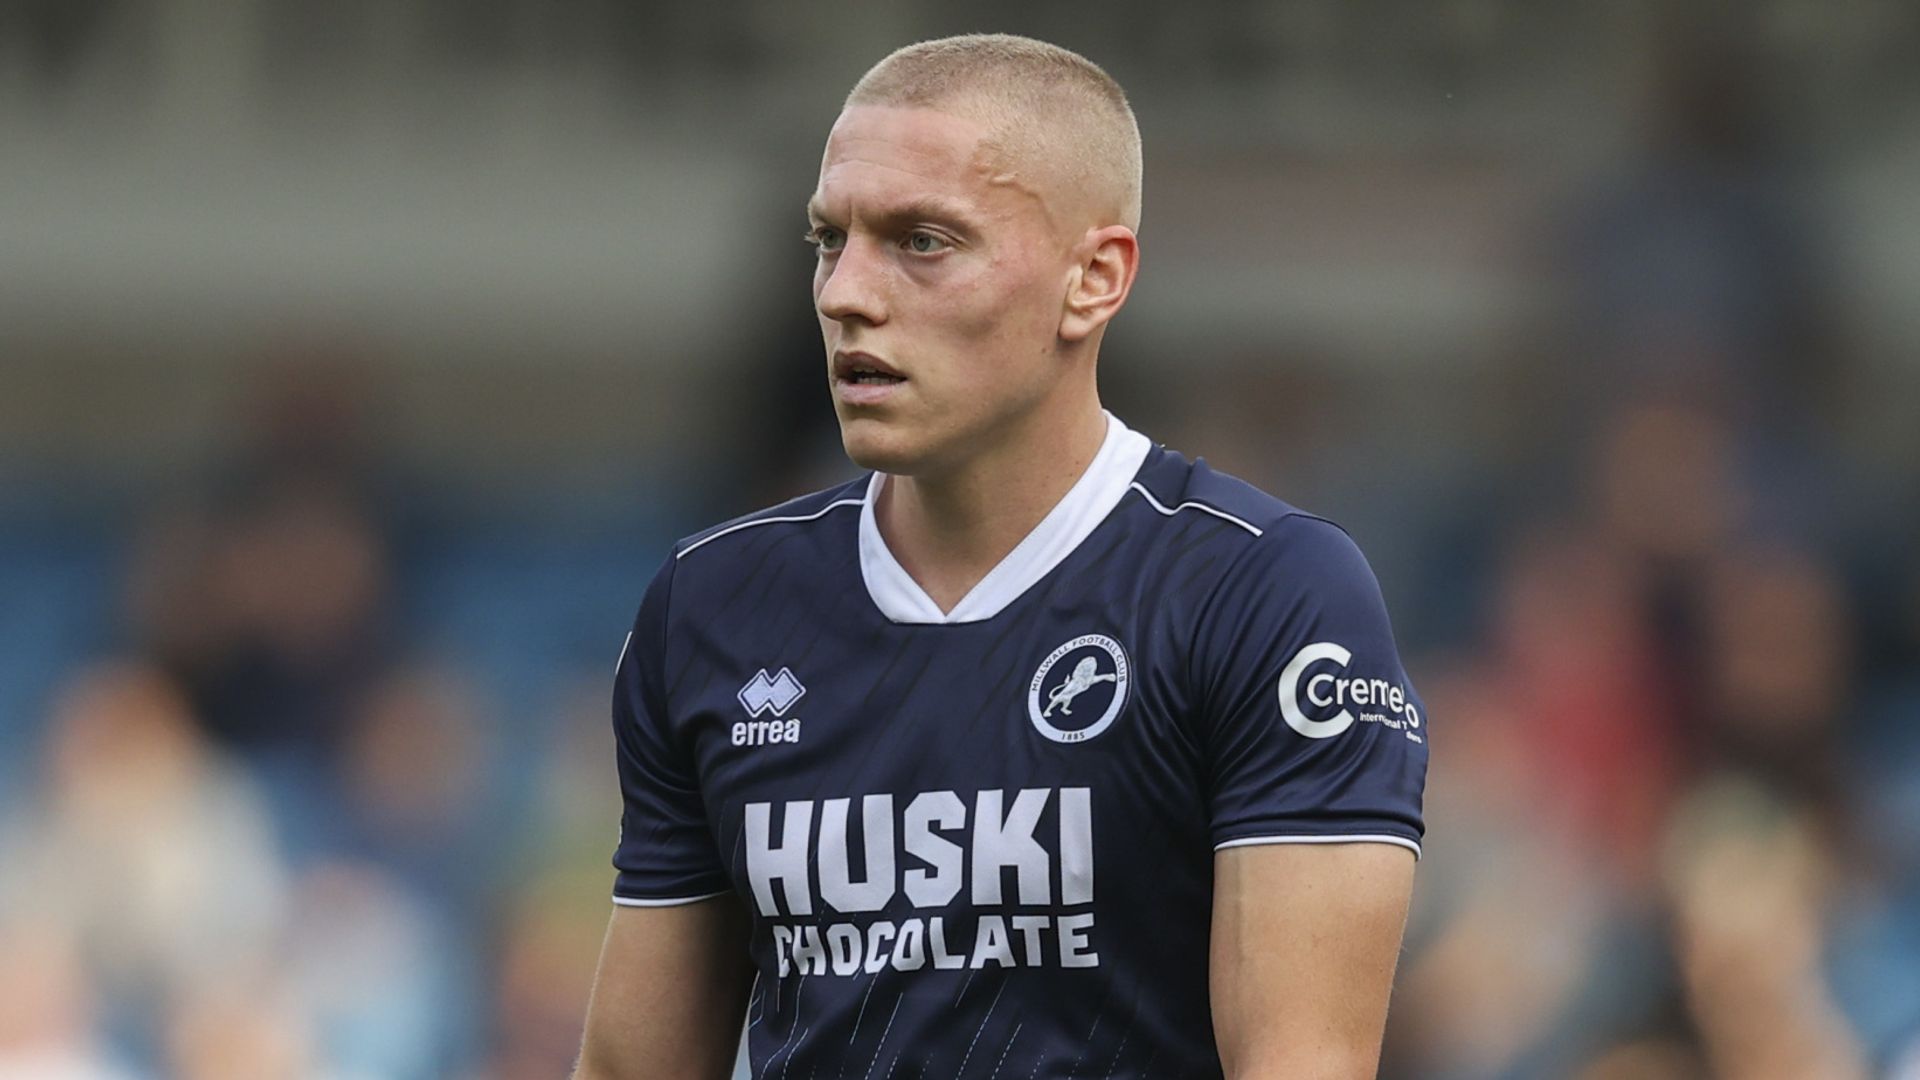 Millwall beat Swansea to end with five straight wins